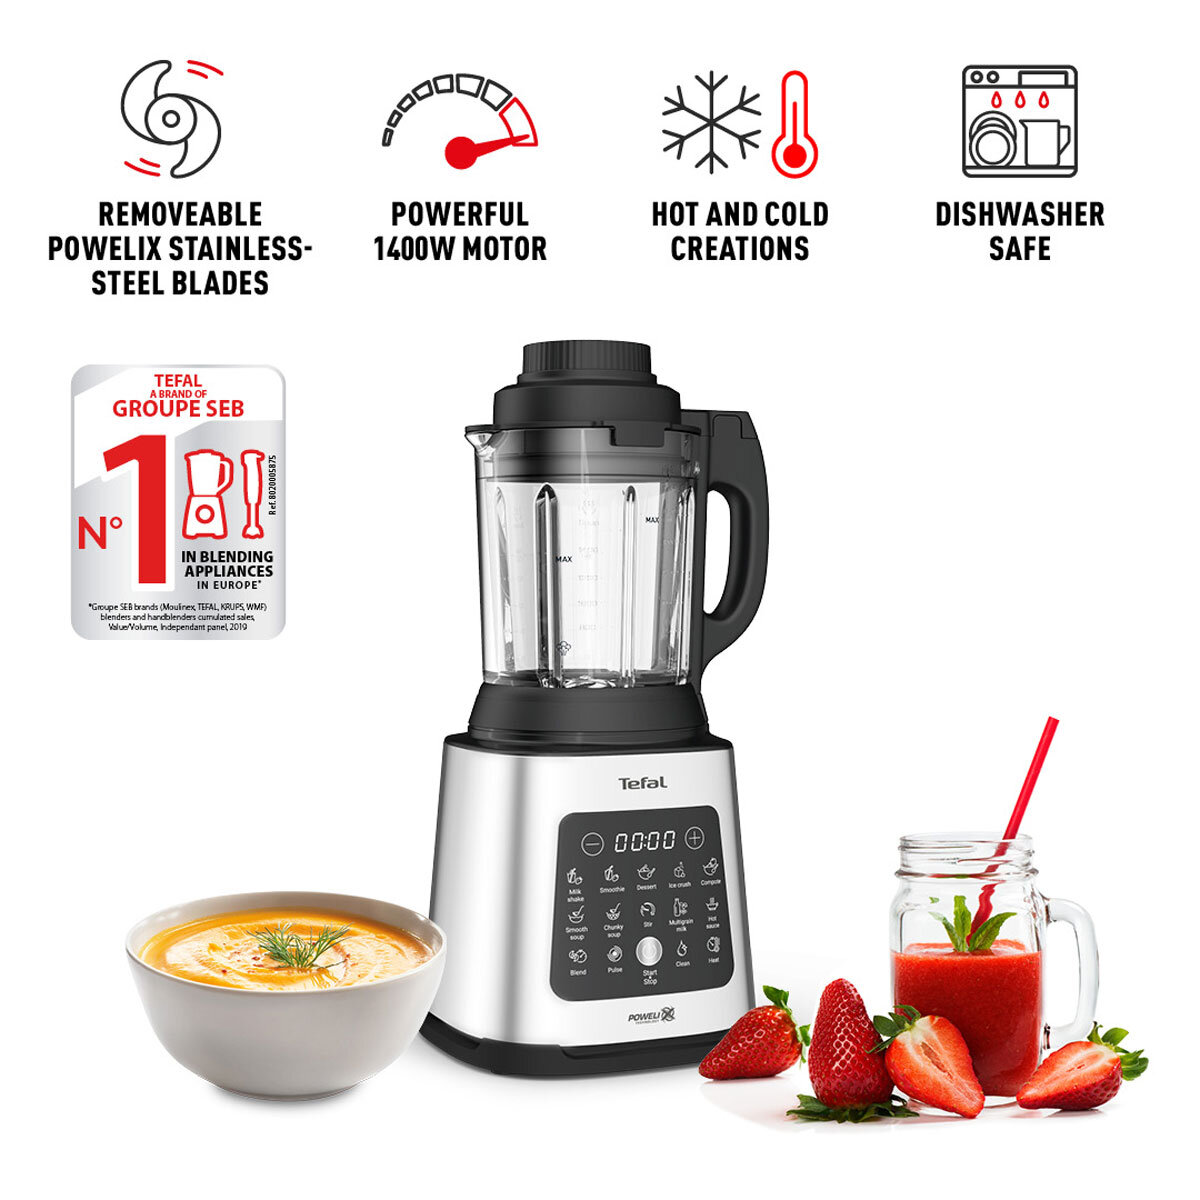 Tefal PerfectMix Cook, Blender & Cooker in Stainless Steel, BL83SD65